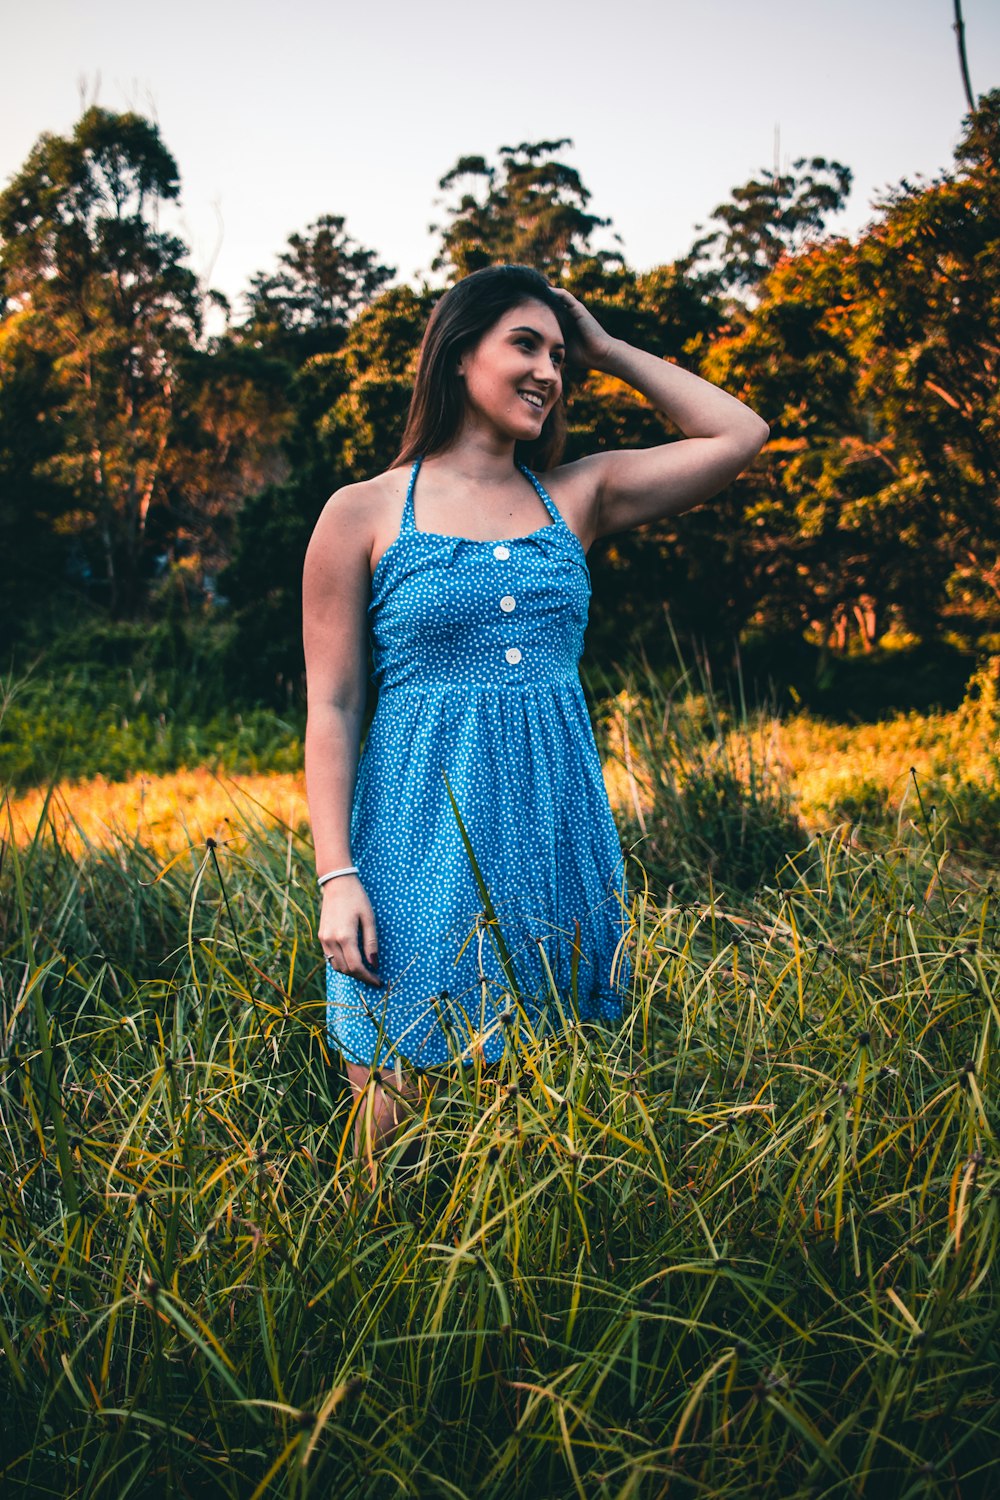 woman in blue and white polka dot spaghetti strap dress standing on green grass field during